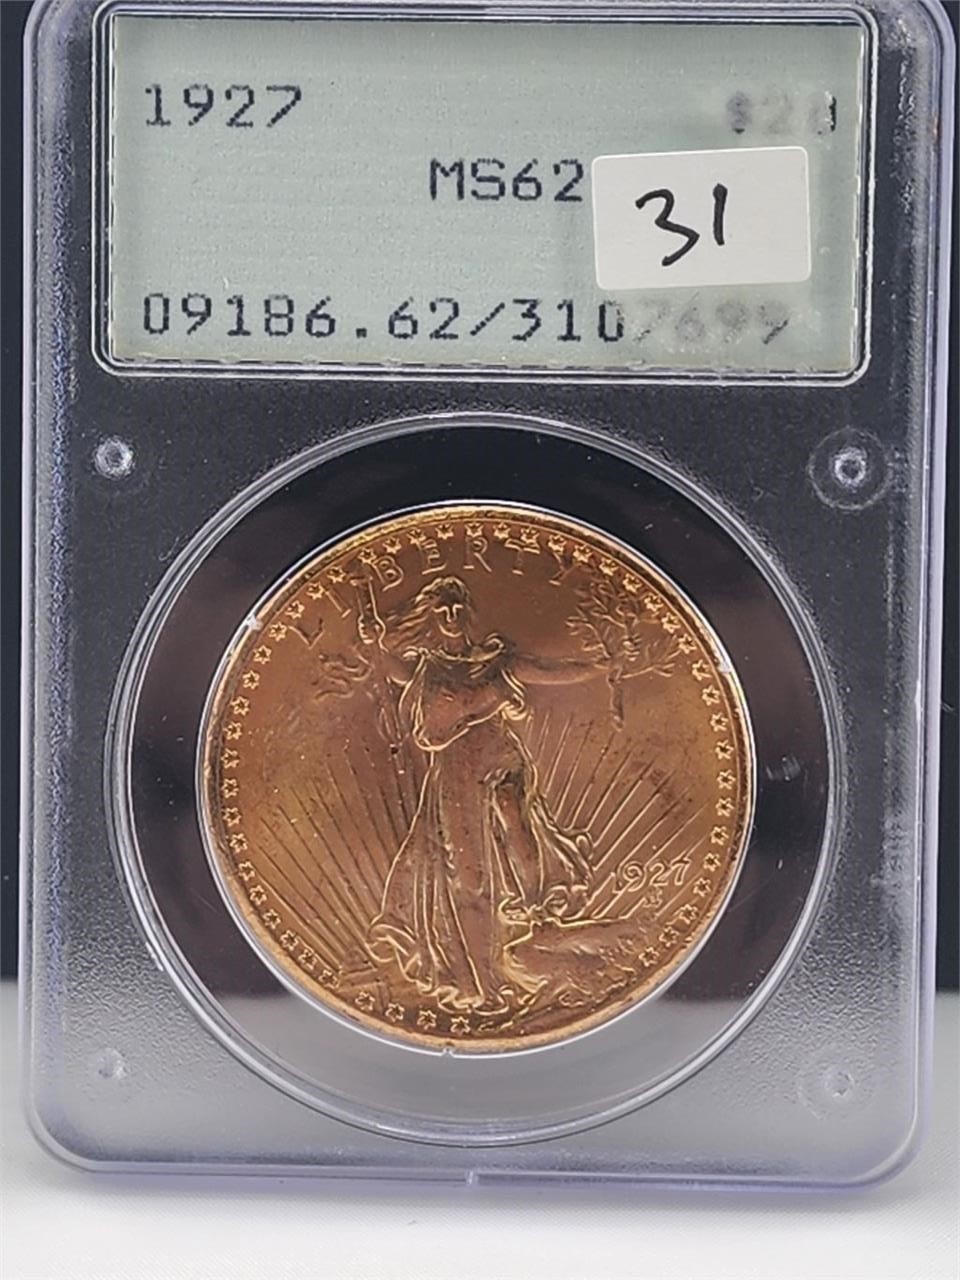 High End Coins- Jewelry- Watches Auction- Live June 8th